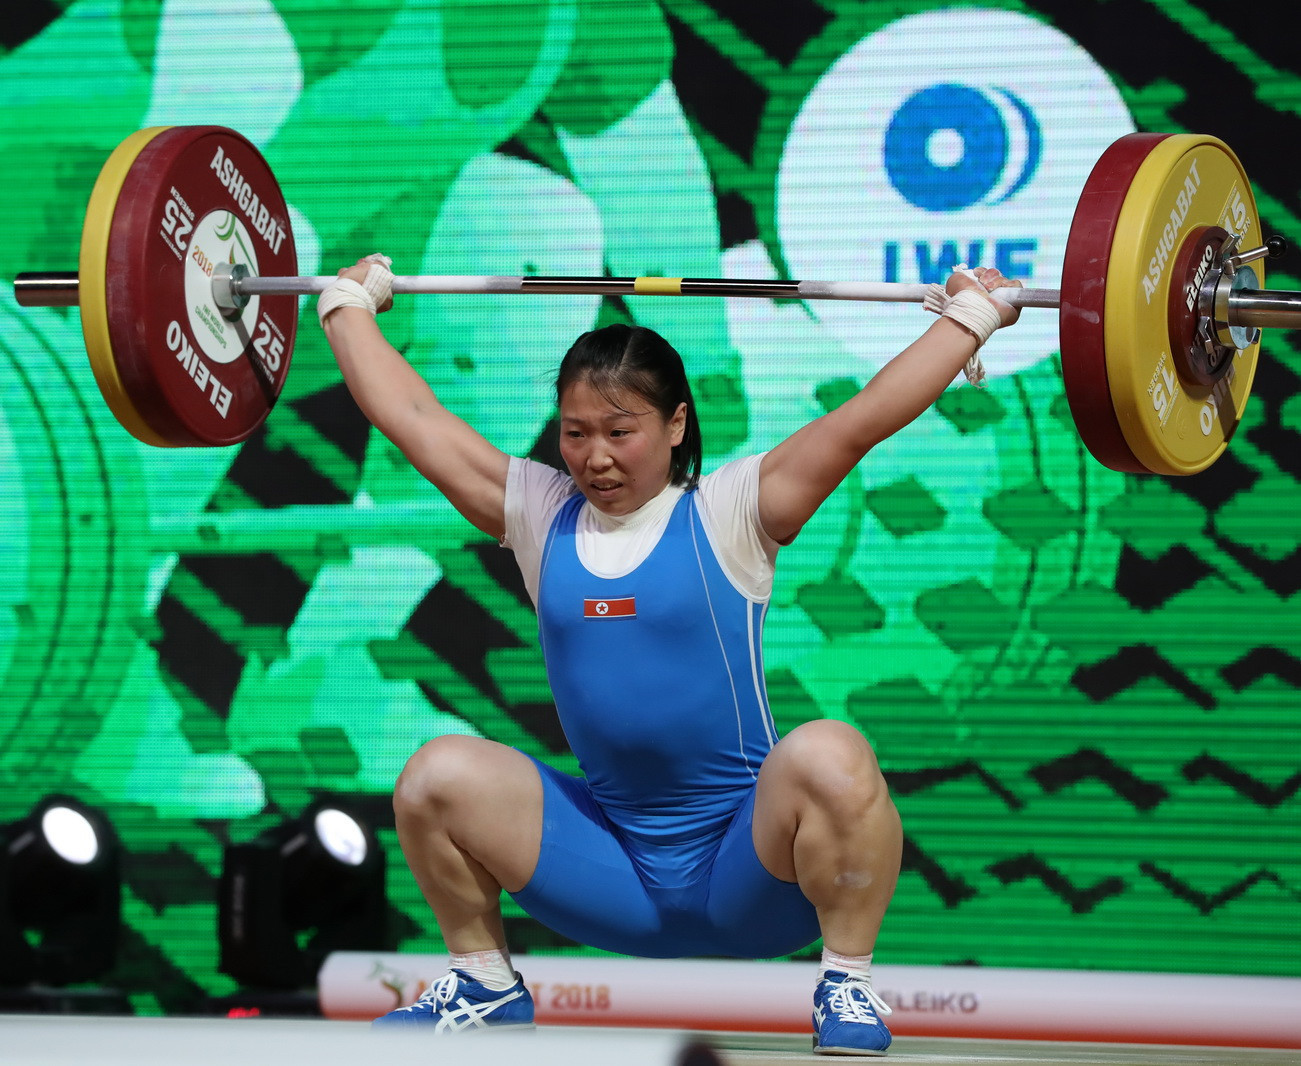 North Korea's Rim Un Sim clinched the overall silver medal ahead of Thailand's Rattanawan Wamalun by virtue of the fact that she posted their identical total of 239kg first ©IWF